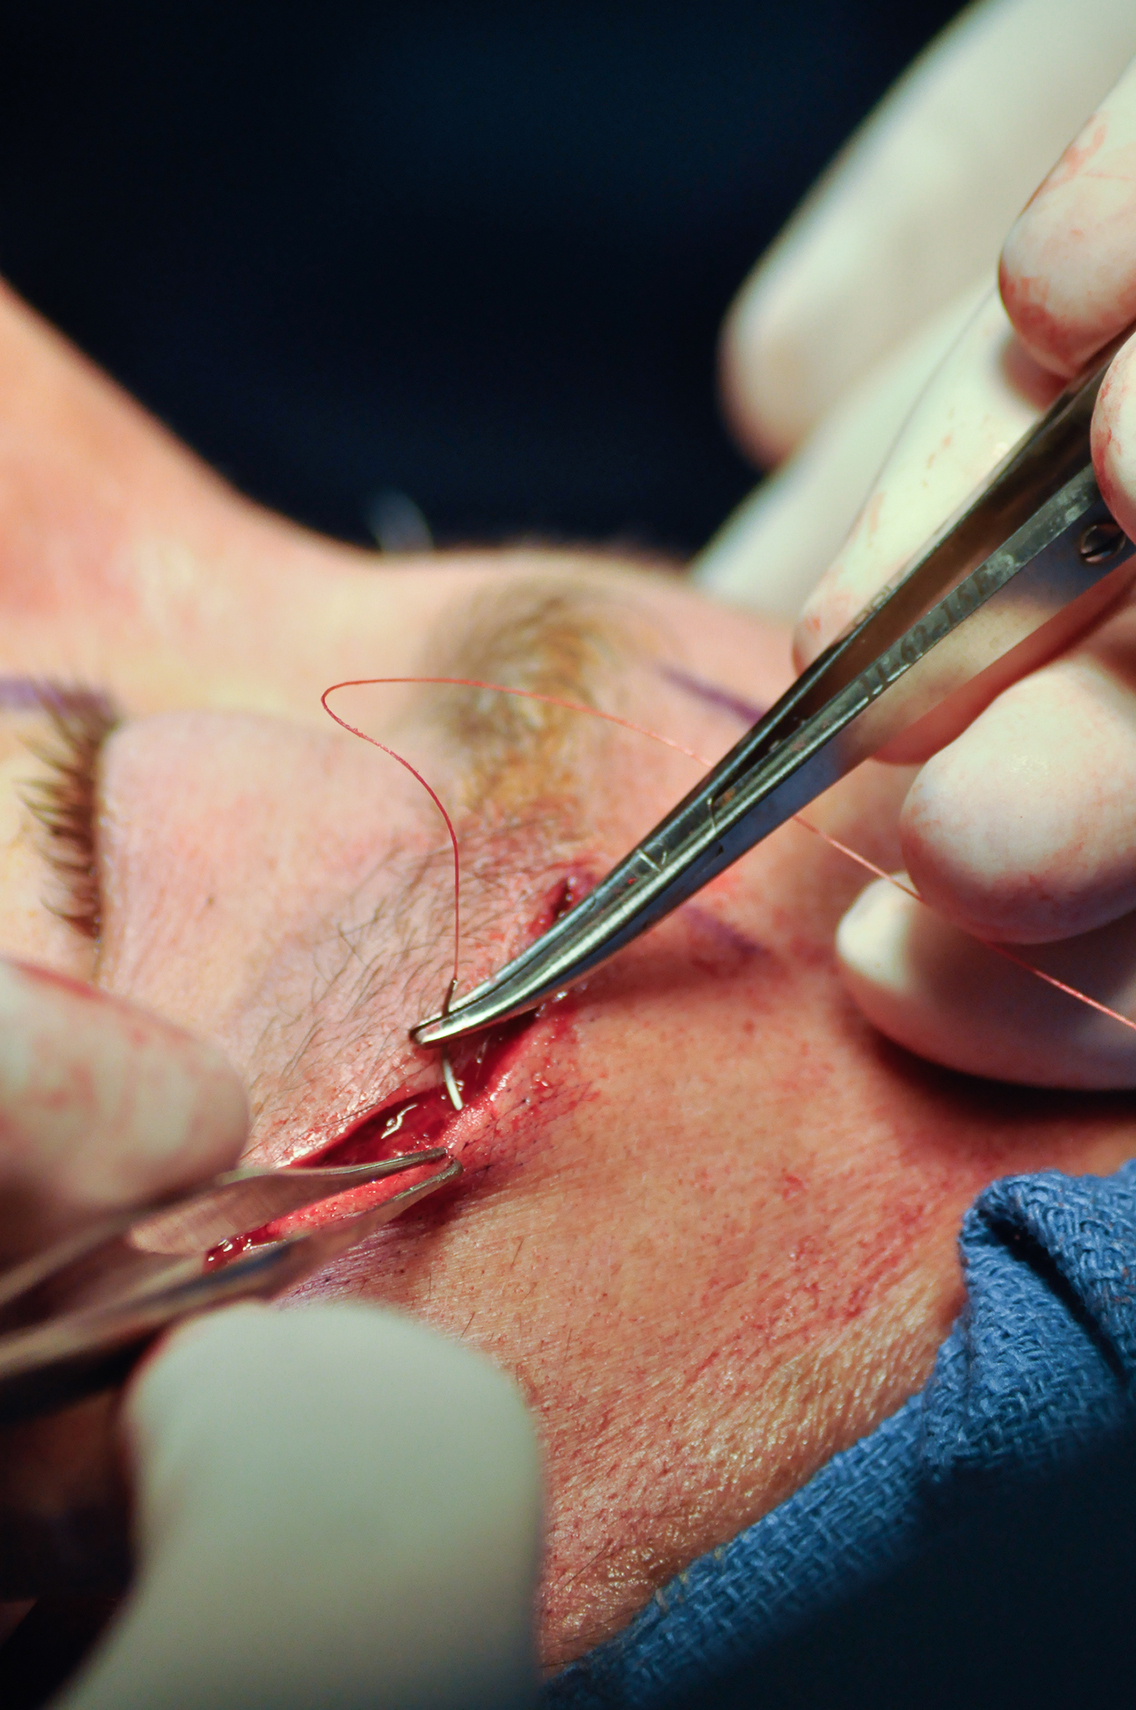 Close-up of sutures being placed during an upper eyelid blepharoplasty procedure.